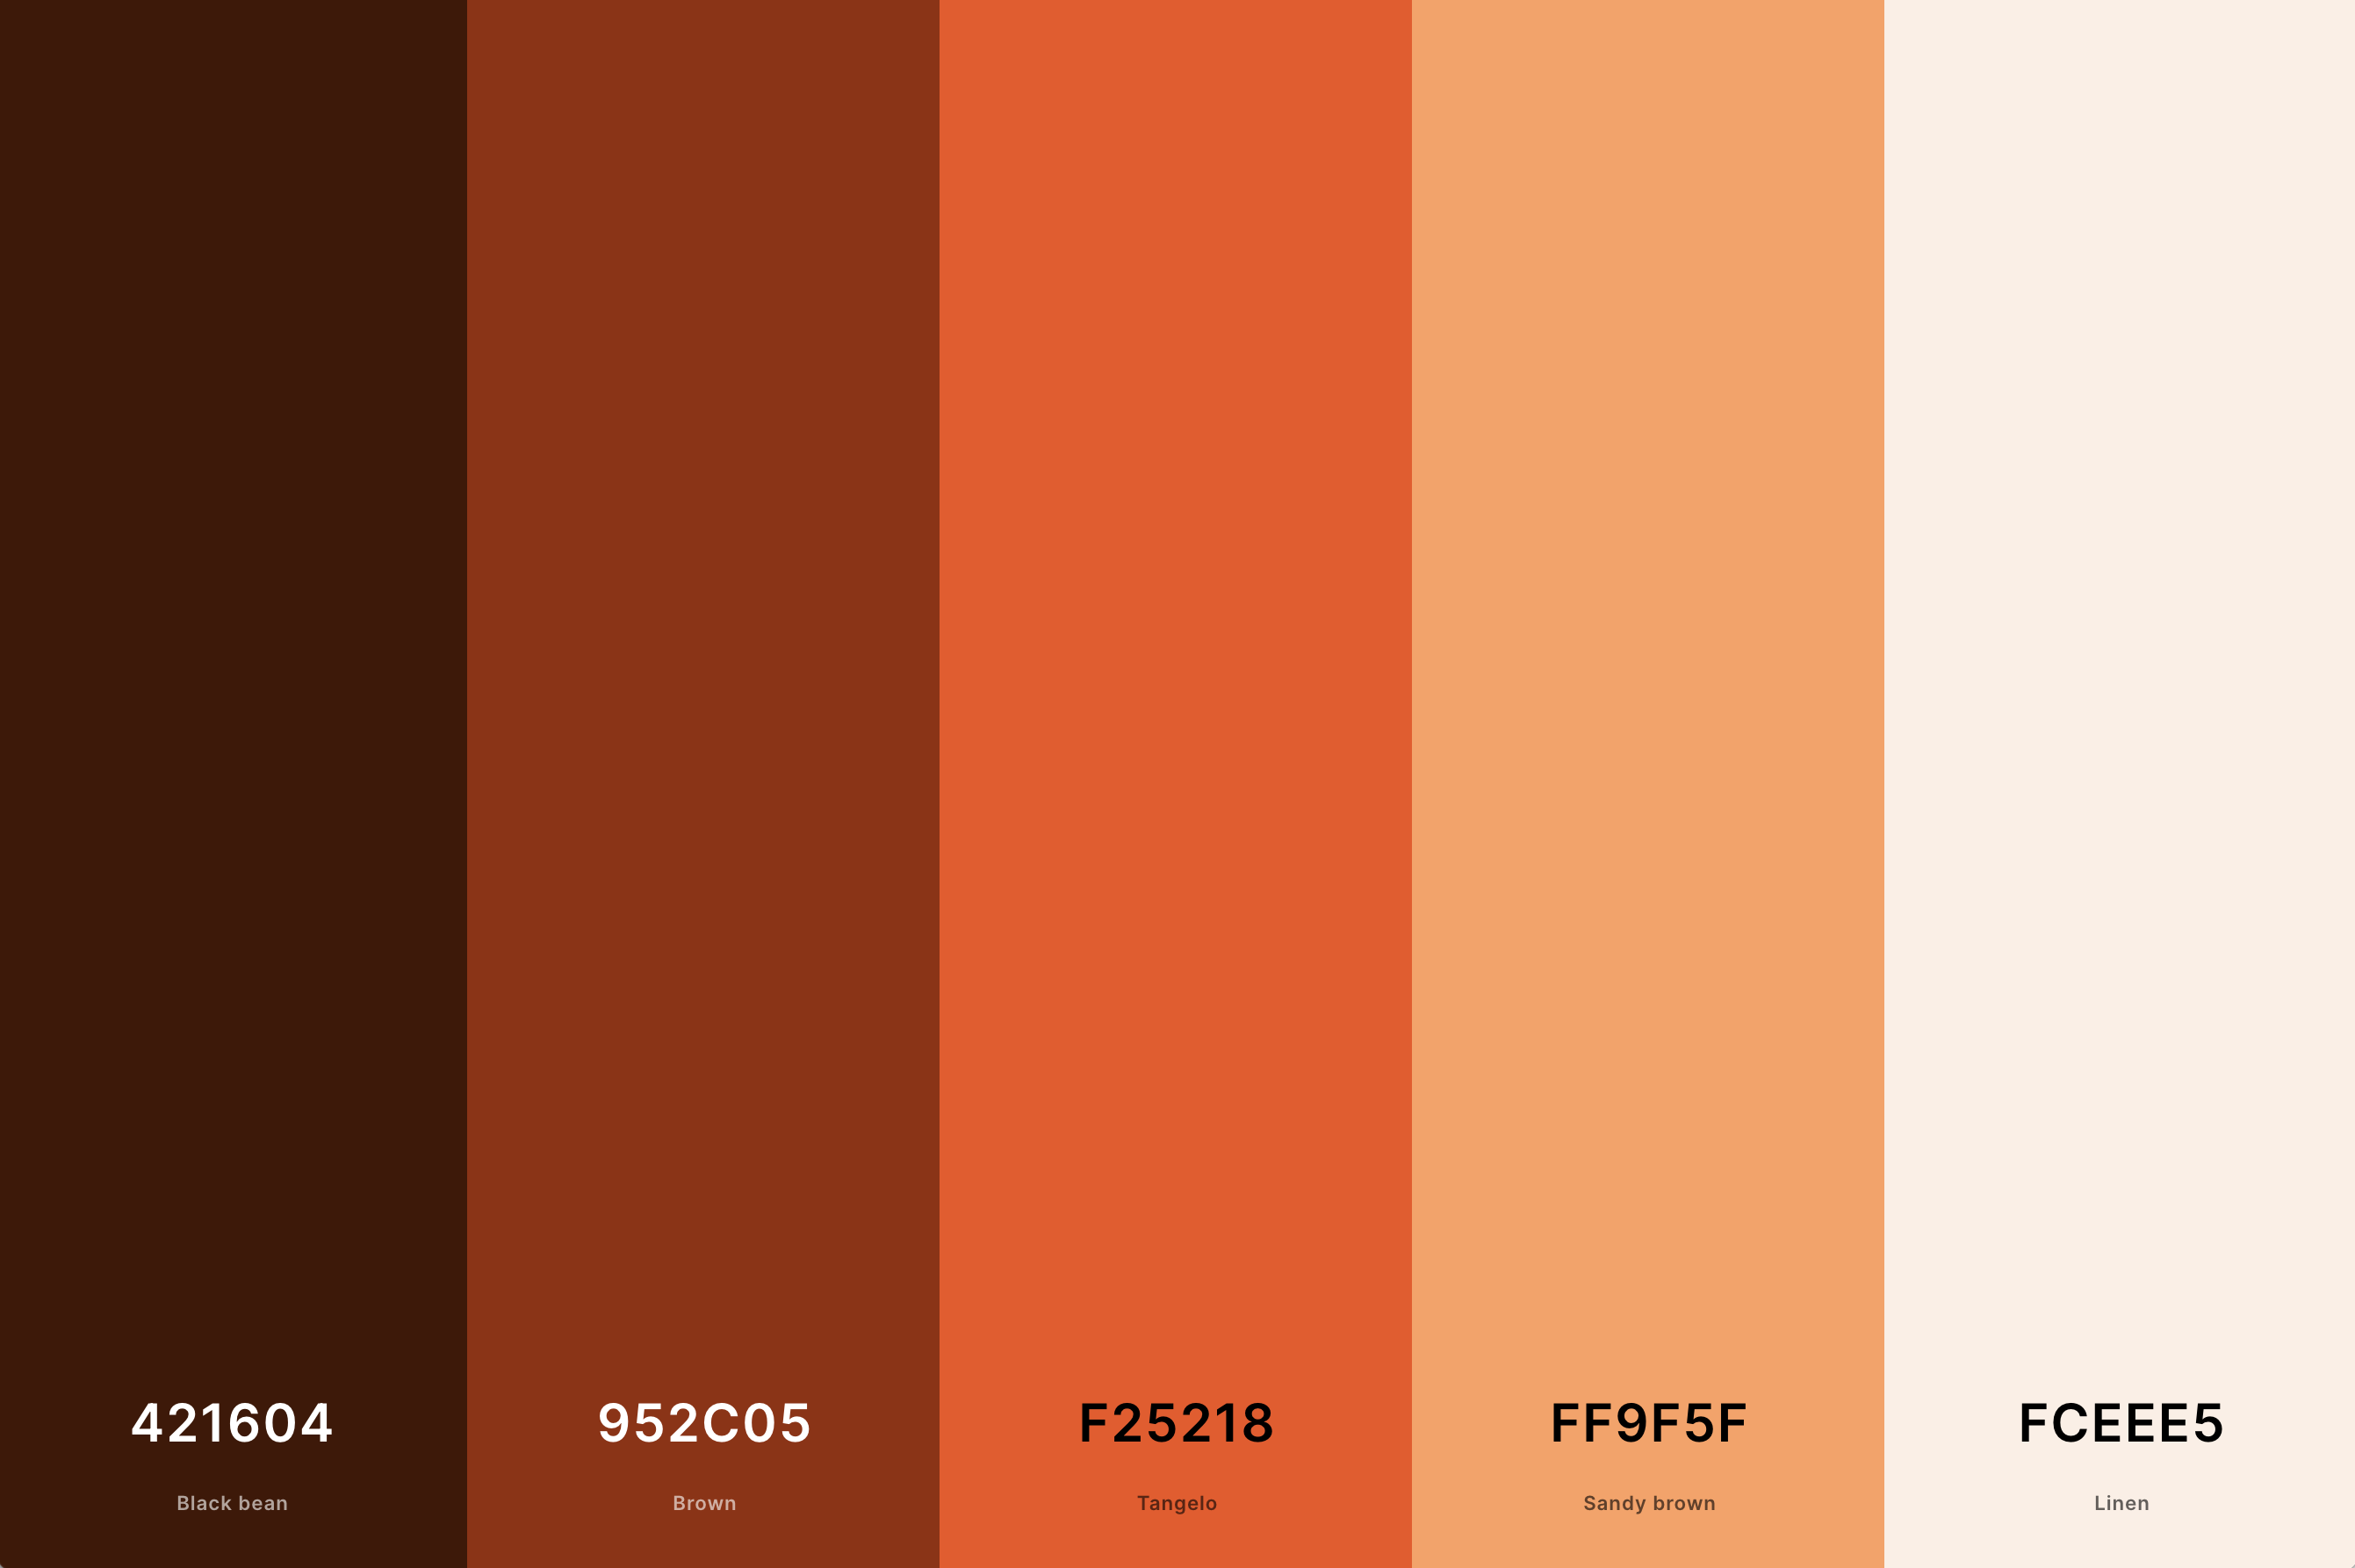 18. Red Panda Color Palette Color Palette with Black Bean (Hex #421604) + Brown (Hex #952C05) + Tangelo (Hex #F25218) + Sandy Brown (Hex #FF9F5F) + Linen (Hex #FCEEE5) Color Palette with Hex Codes